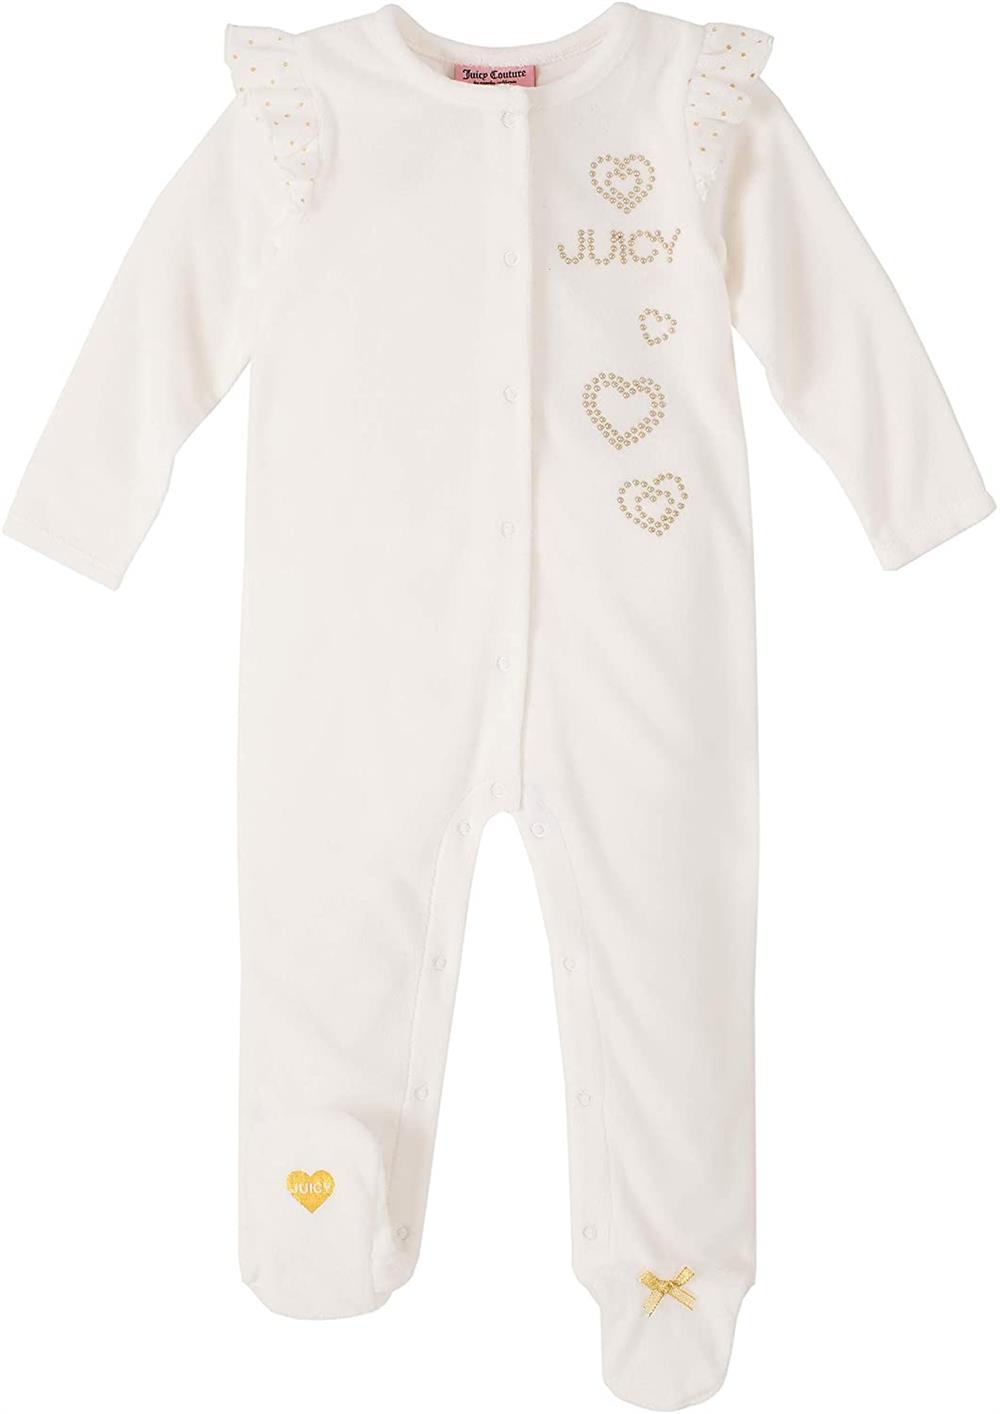 Juicy Couture Girls 0-9 Months Bow Velour Sleep and Play